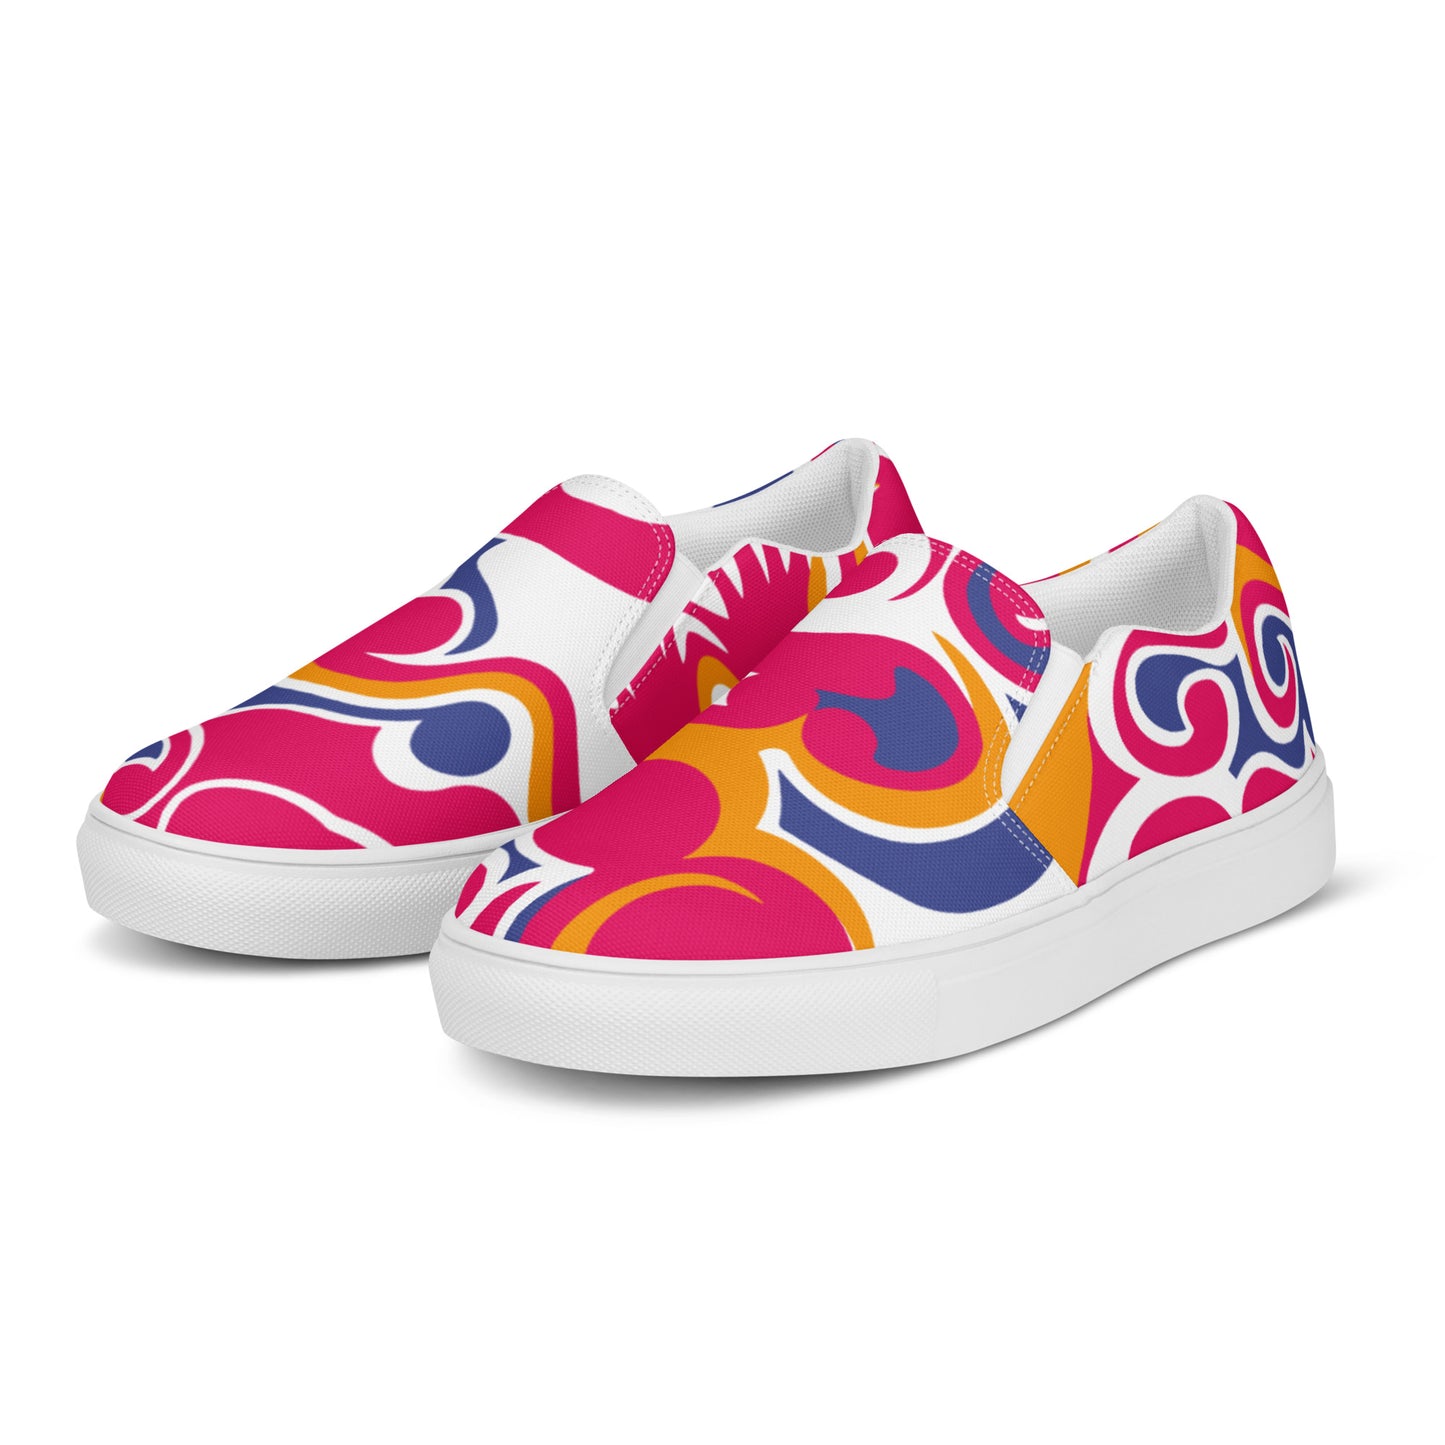 JAZZ by LAPD - Men’s slip-on canvas shoes